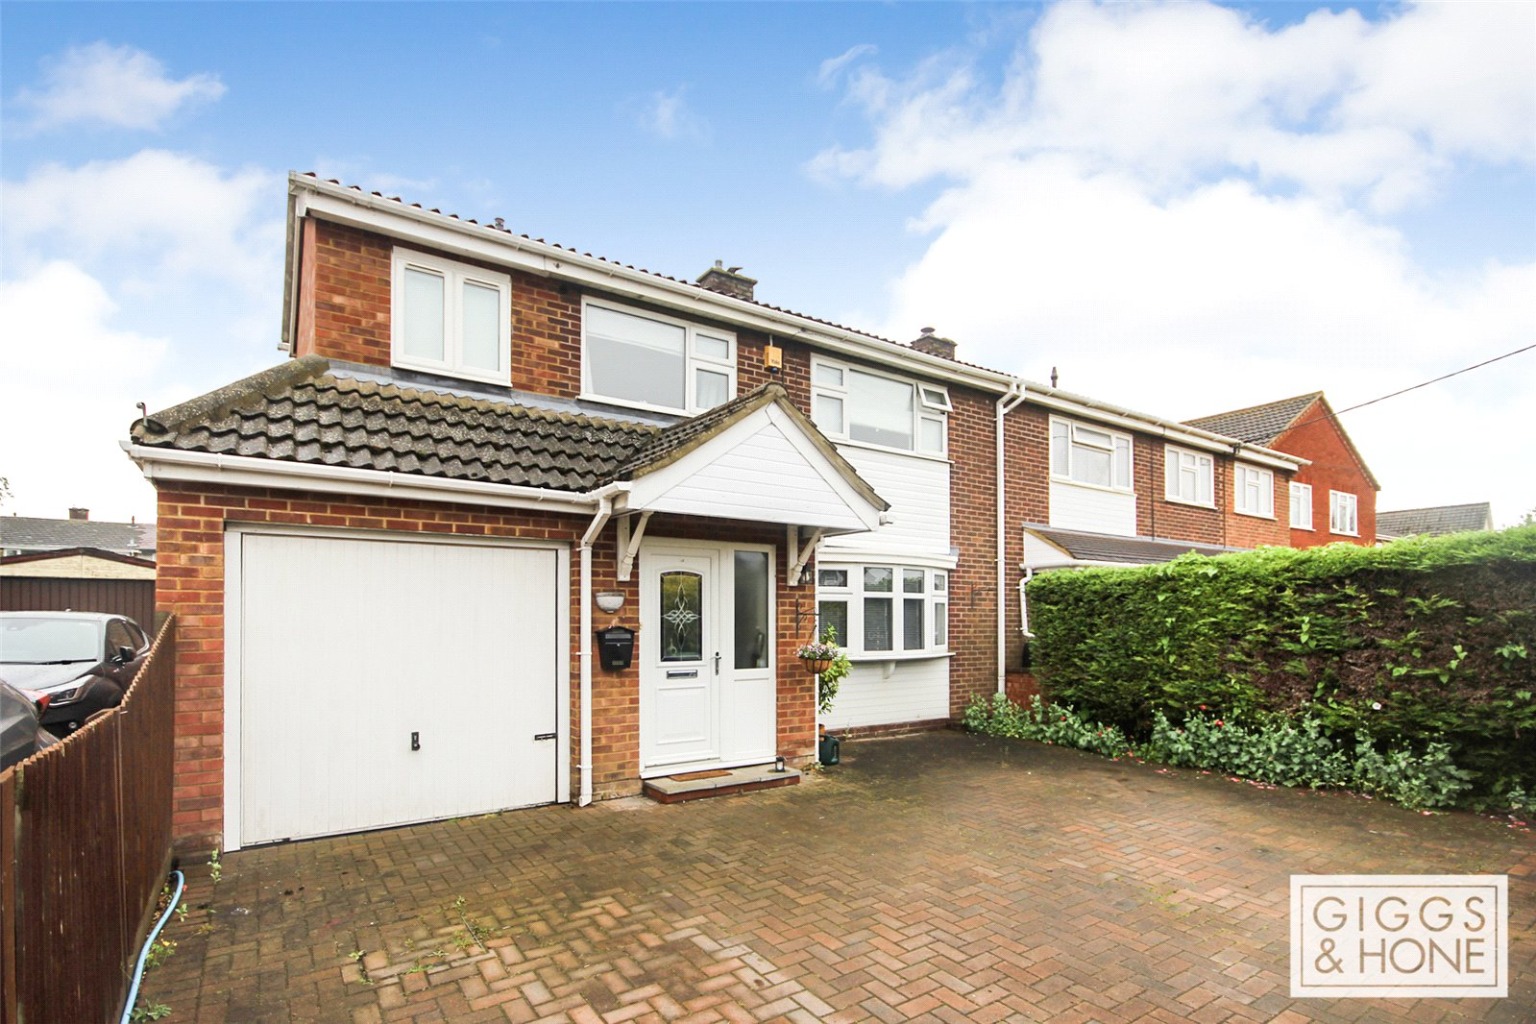 This extended family home is located in the popular village of Cranfield, offering plenty of local amenities nearby and excellent primary and middle school which are within walking distance. The property benefits from a larger than average garage and driveway to the front for multiple vehicles.